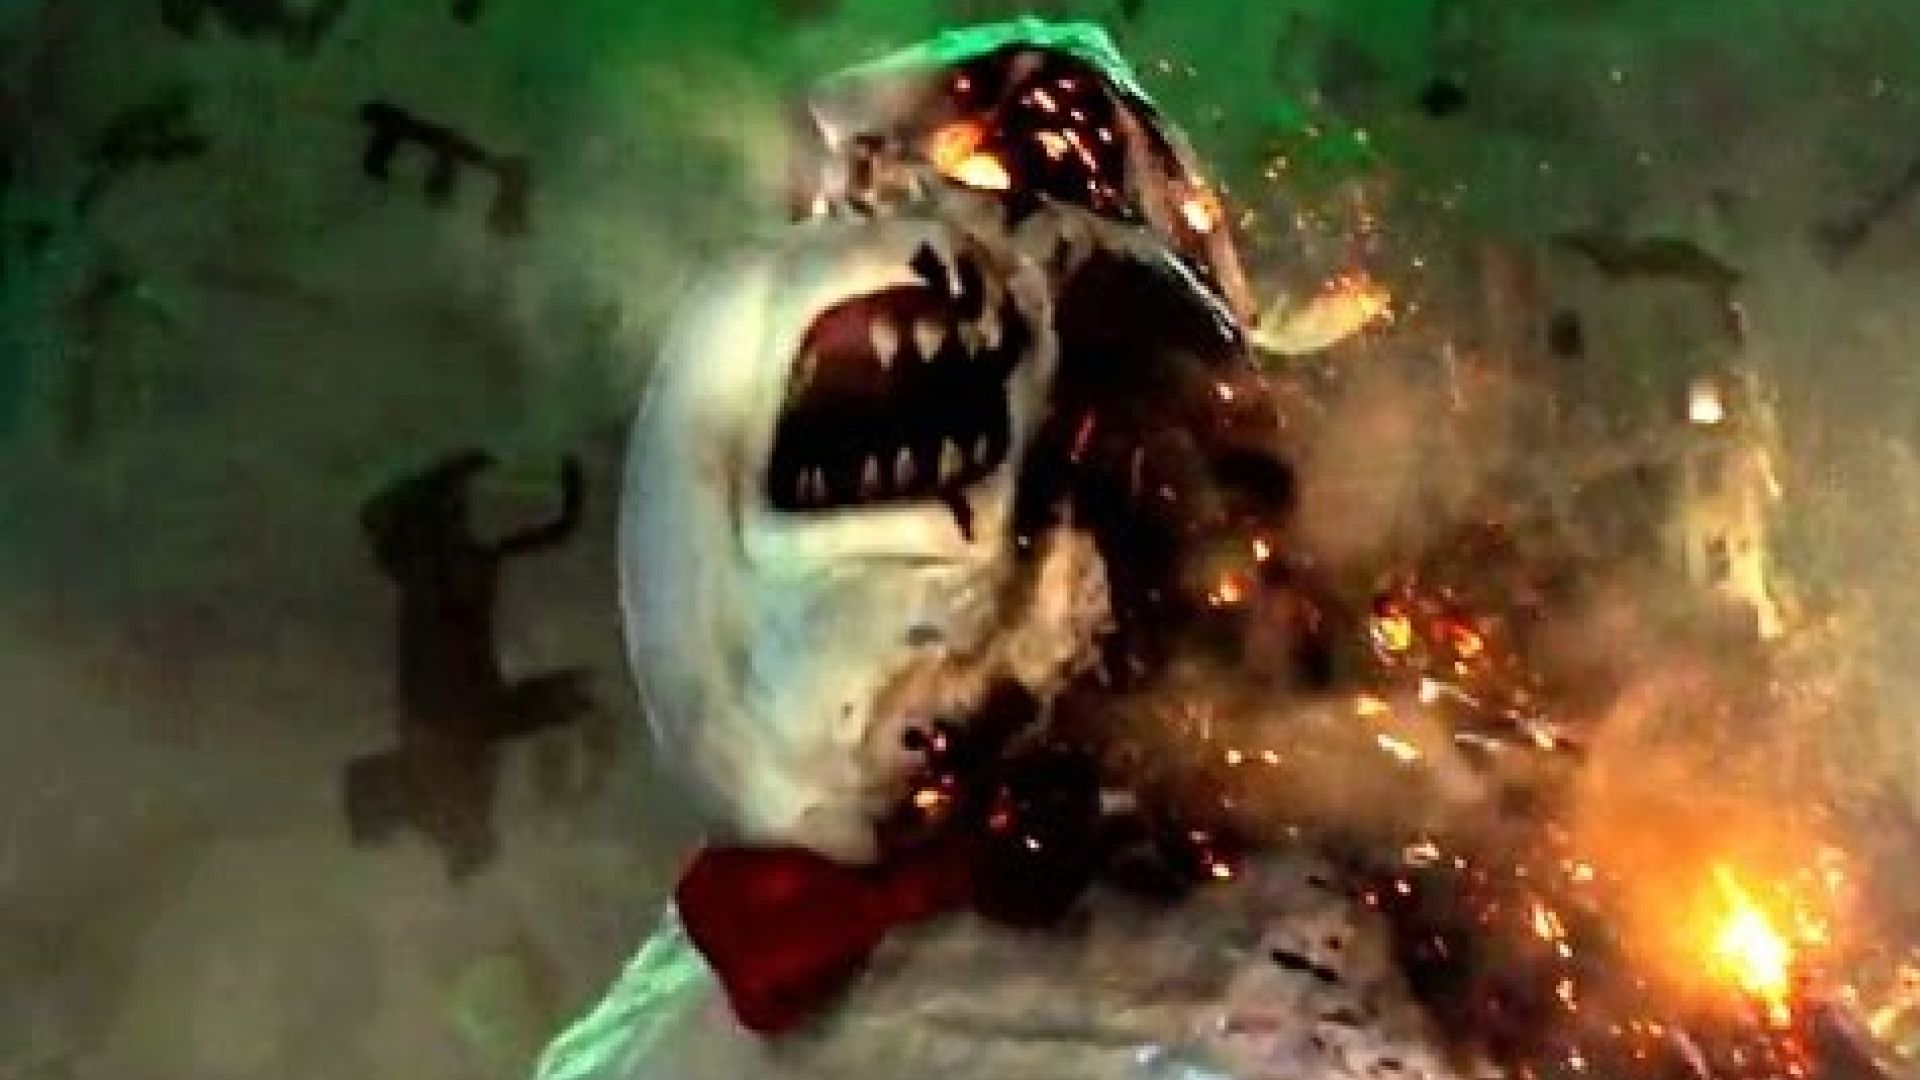 A glimpse of Ghostbusters villain in this latest trailer. In